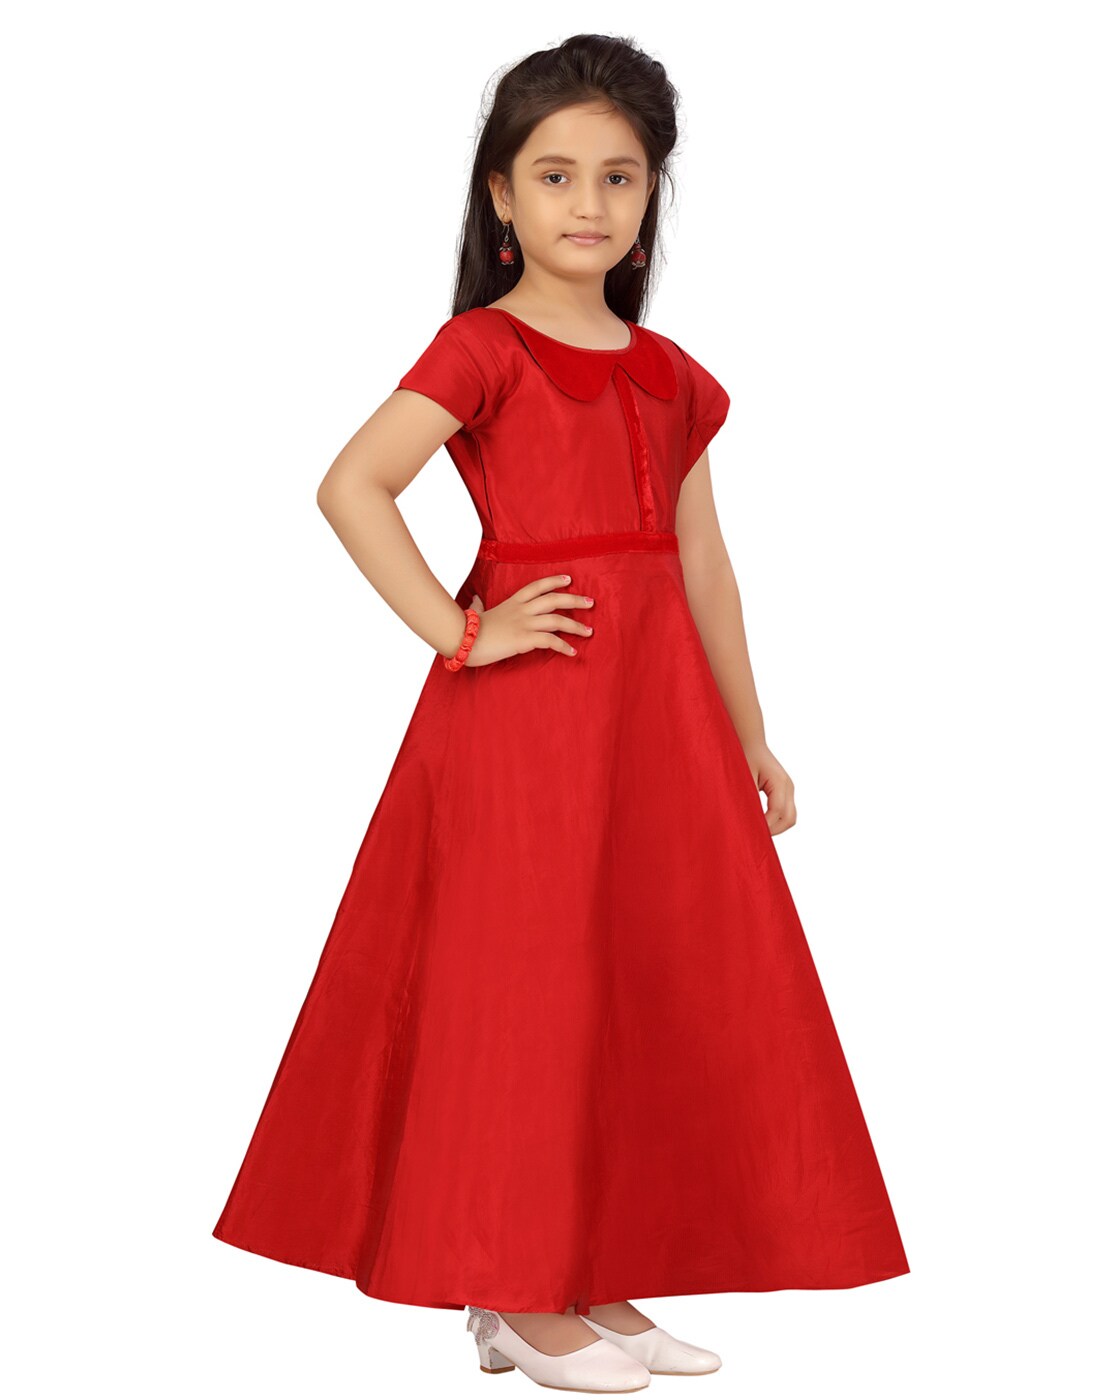 Cute Red Dress for kids  Buy Trendy Red Colour Party Wear Dress